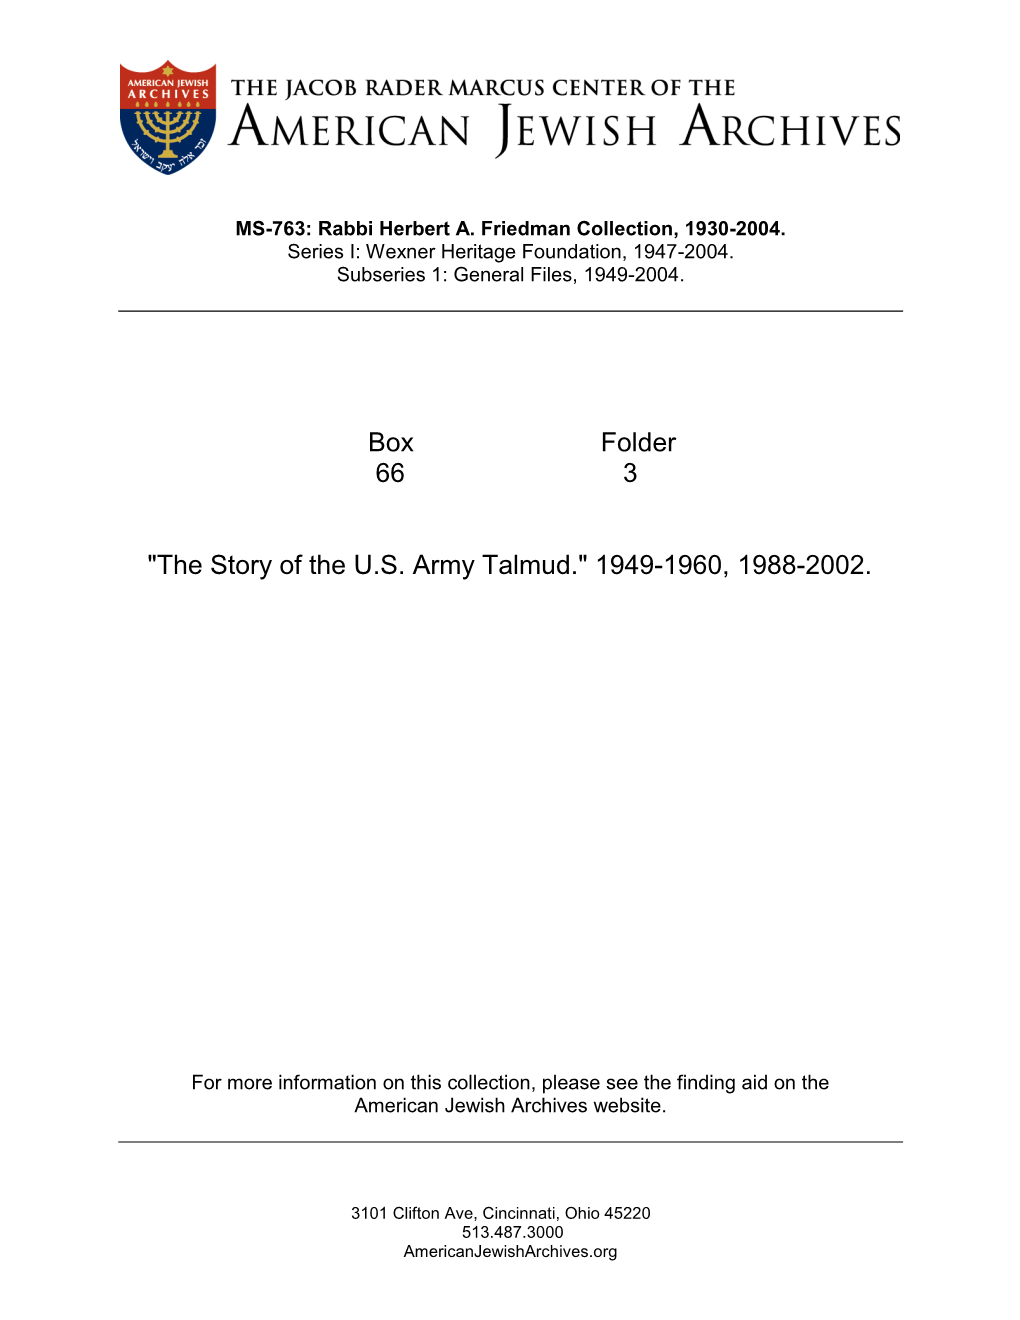 "The Story of the US Army Talmud." 1949-1960, 1988-2002